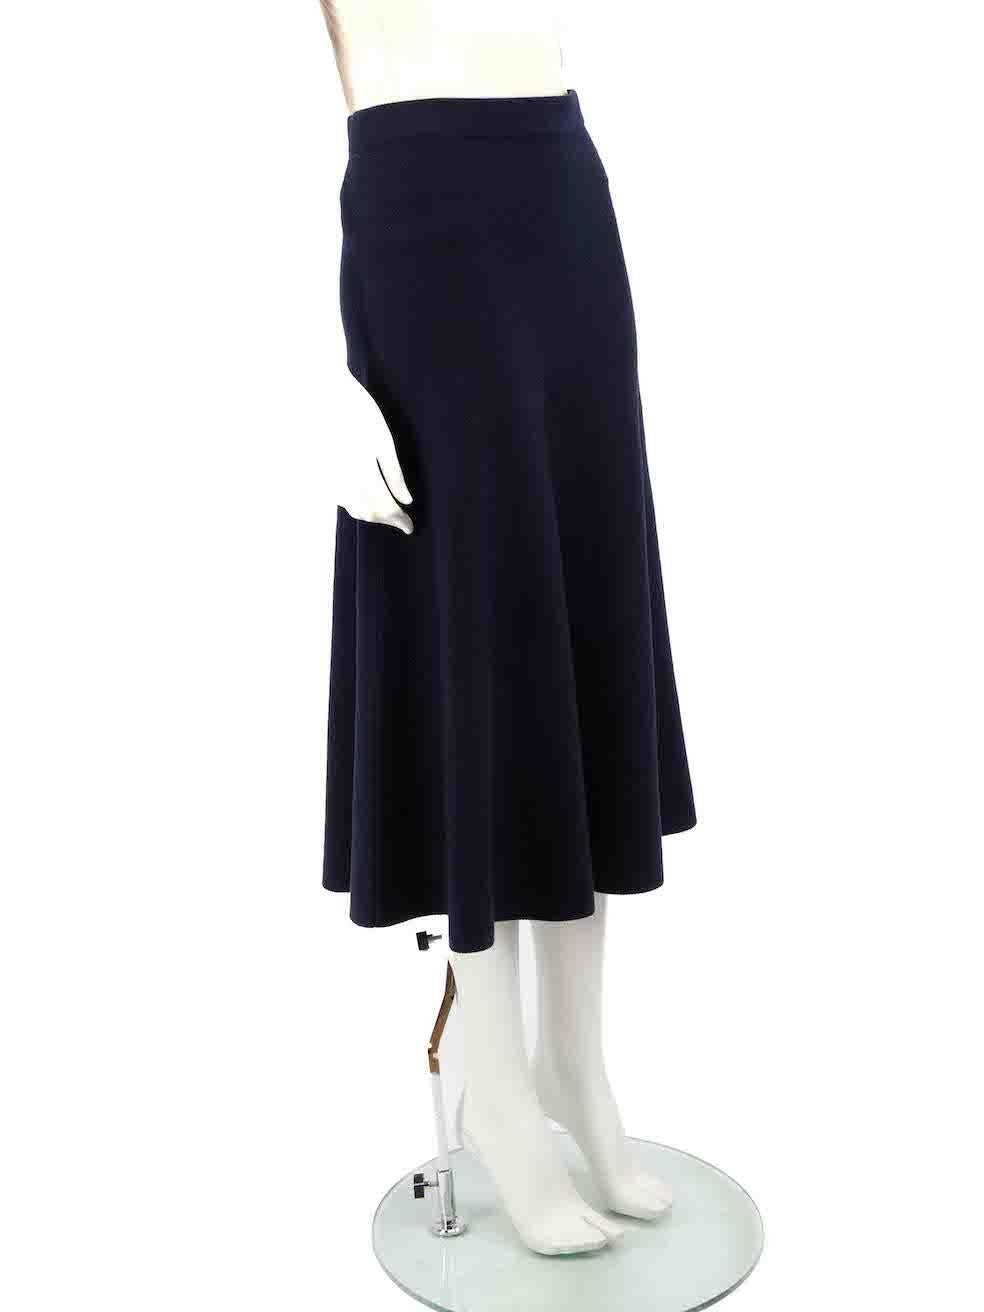 CONDITION is Very good. Hardly any visible wear to skirt is evident on this used Gabriela Hearst designer resale item.
 
 
 
 Details
 
 
 Navy
 
 Wool
 
 Knit skirt
 
 Midi
 
 Elasticated waistband
 
 
 
 
 
 Composition
 
 86% Wool, 10% Cashmere,